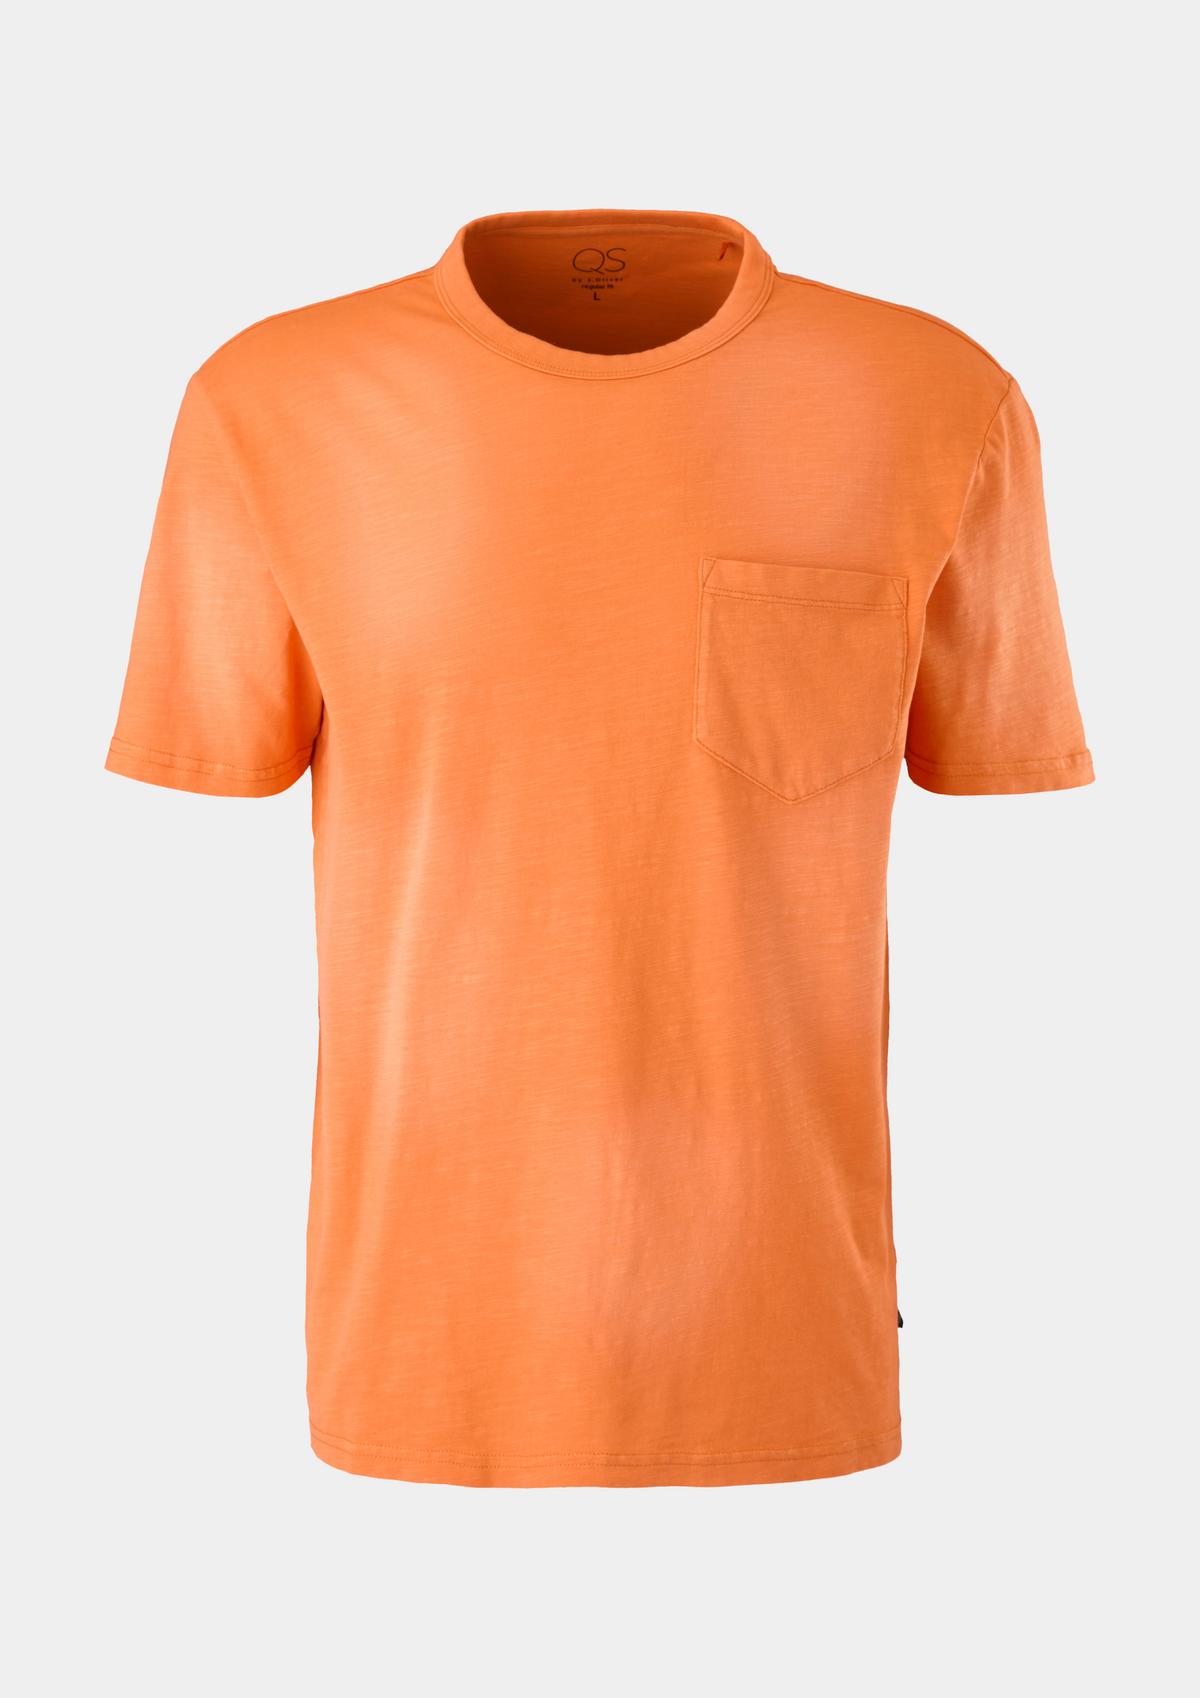 T-shirt with a orange breast pocket 